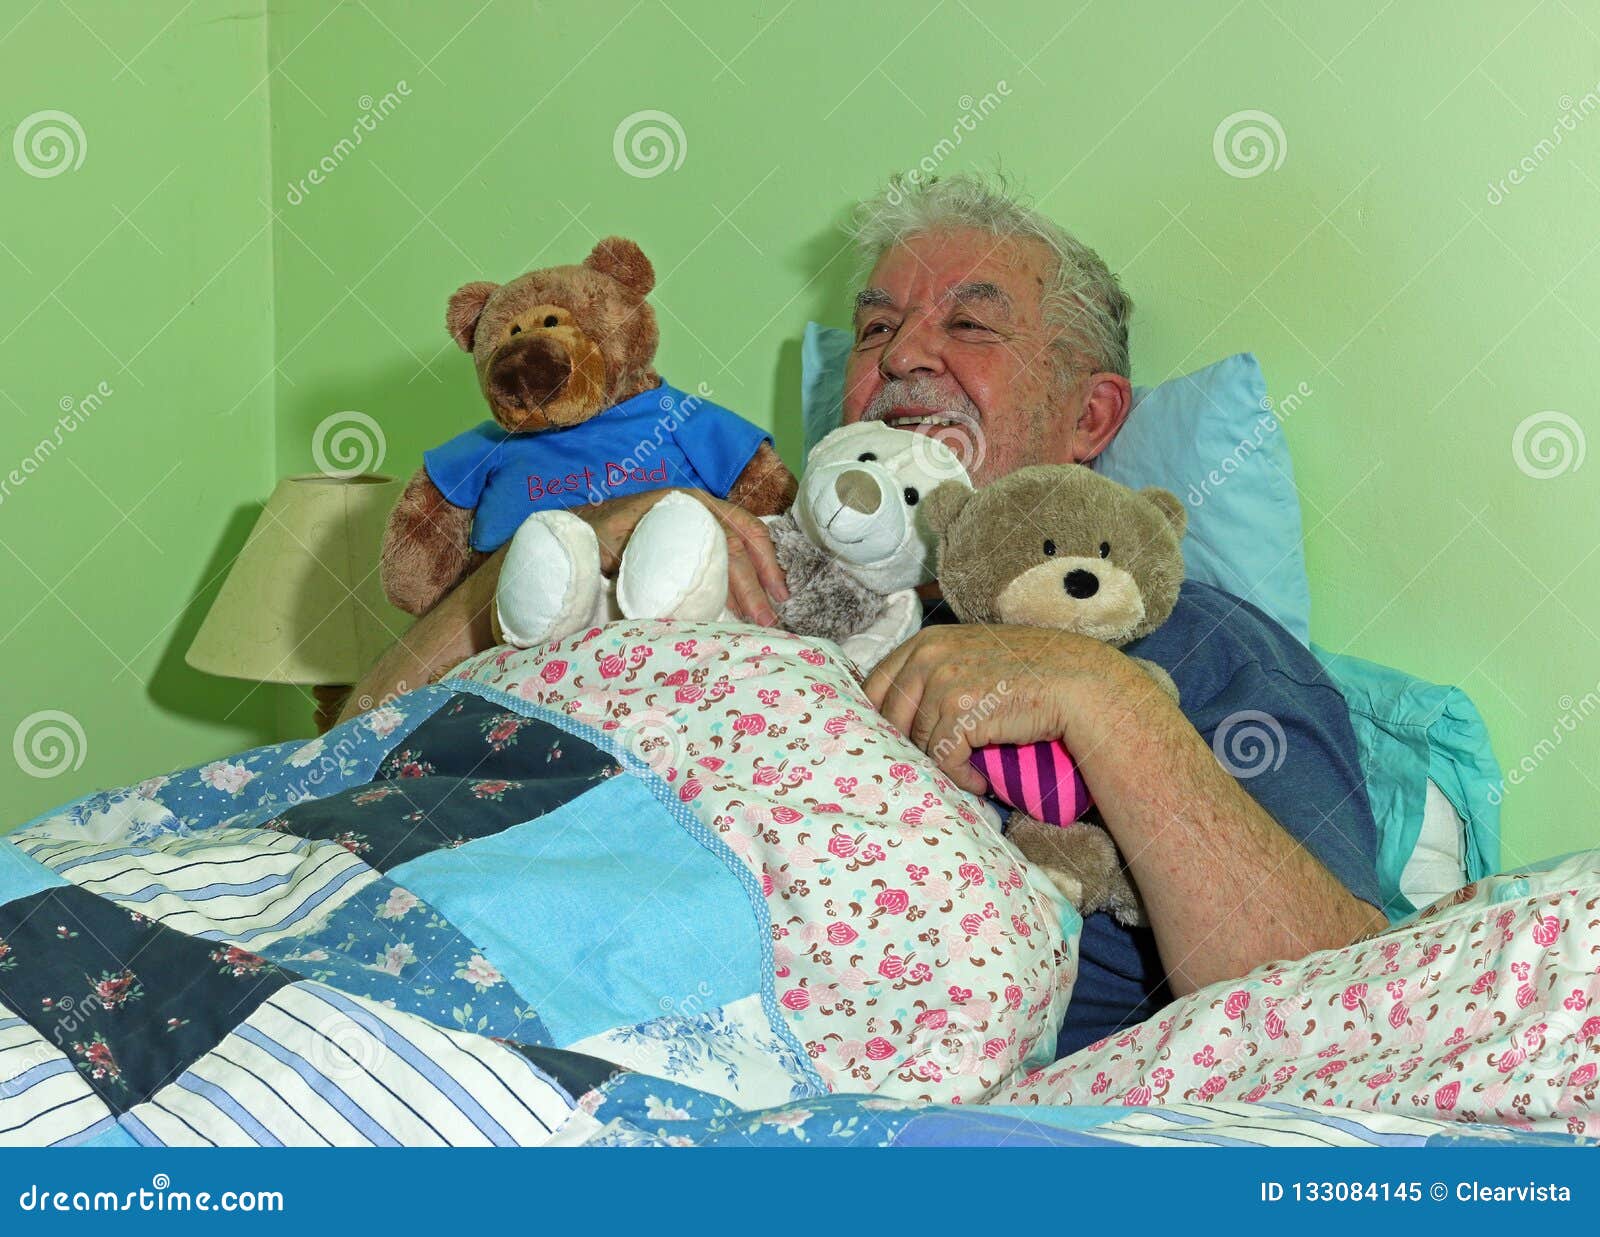 senior man in bed with soft cuddly toys.